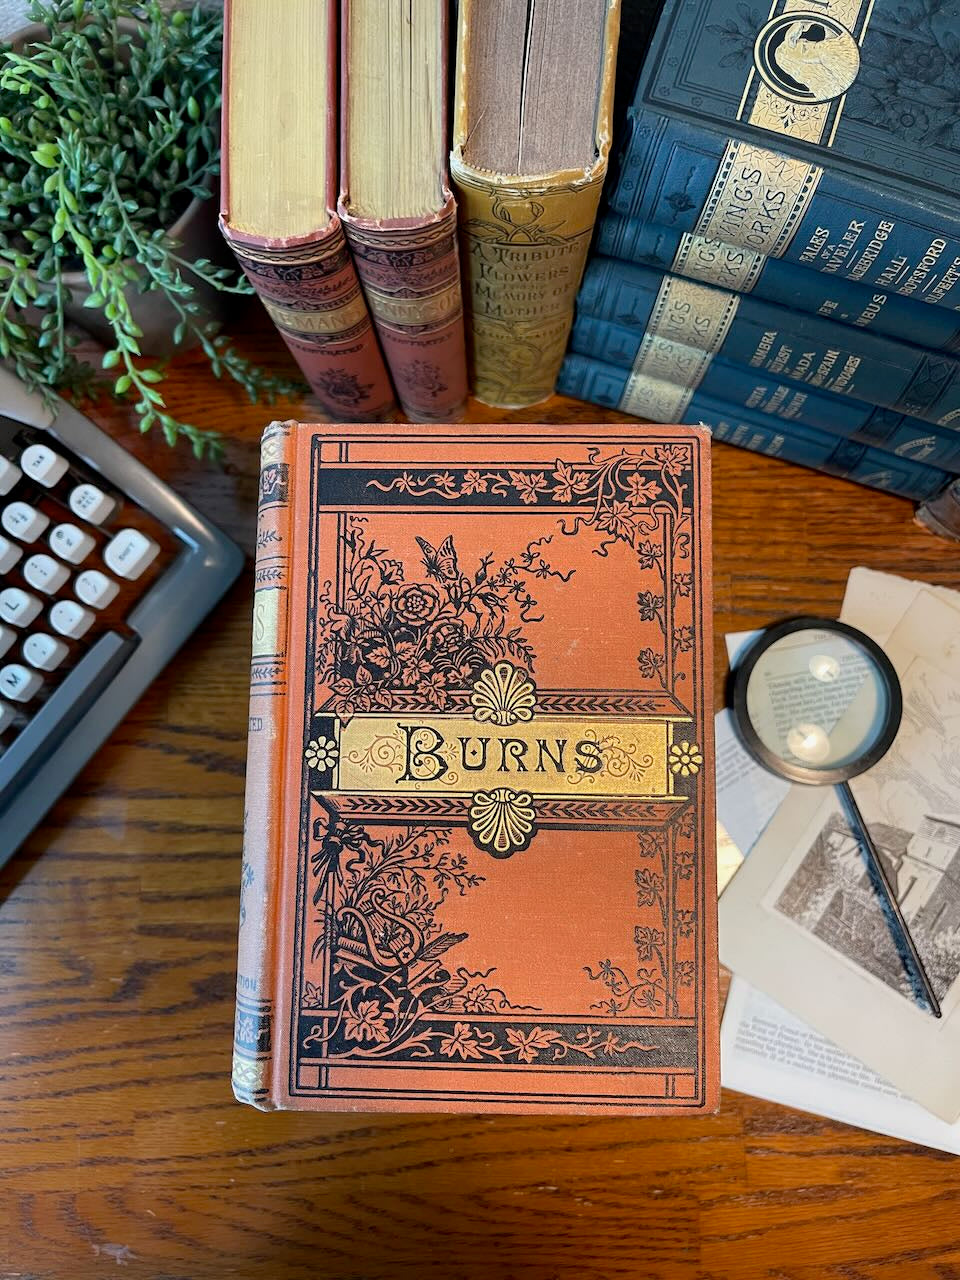 The Poetical Works of Burns / 1880 - Precious Cache